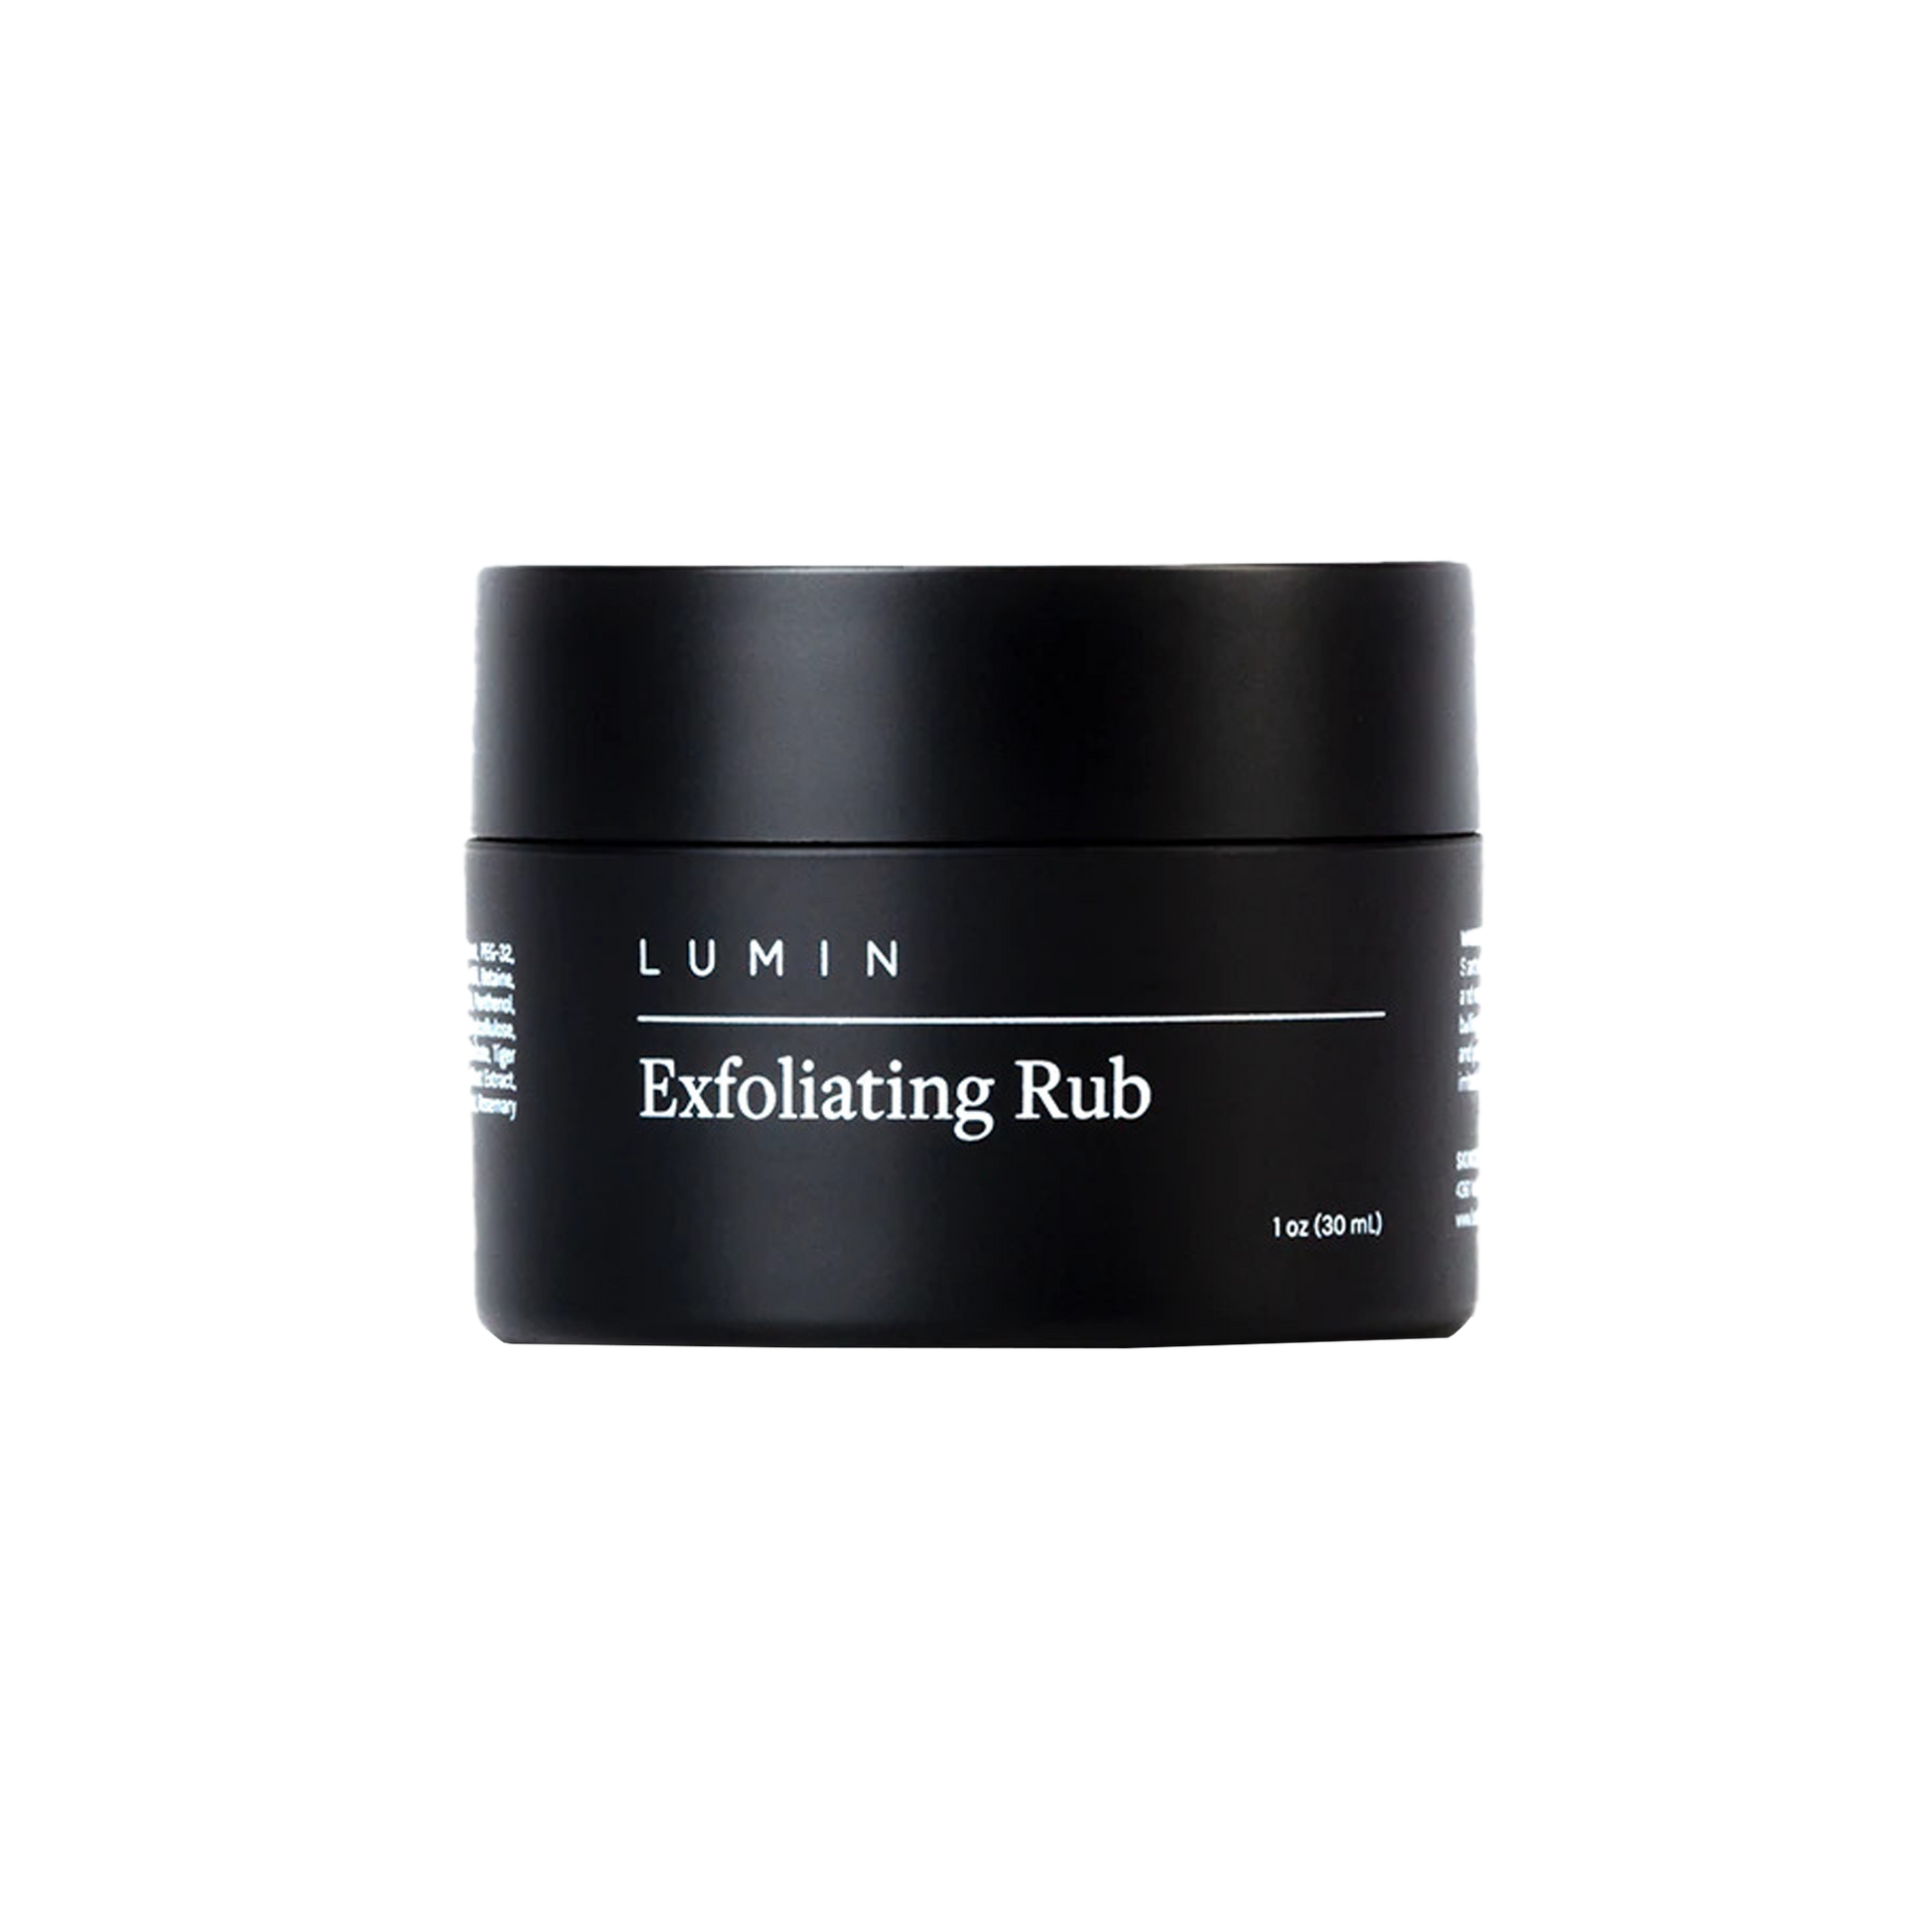 Lumin Exfoliating Rub: Our invigorating exfoliating rub for men helps clear out dirt and impurities to help prevent breakouts and improve overall texture. When it comes to getting great skin, it’s essential to exfoliate your face. Buff away dead skin cells, prevent post-shave irritation, and fade acne scarring with powerful natural ingredients. Use once or twice a week for calm, clear, baby-smooth skin.  This skin-smoothing formula reduces the appearance of fine lines and wrinkles with regular use.